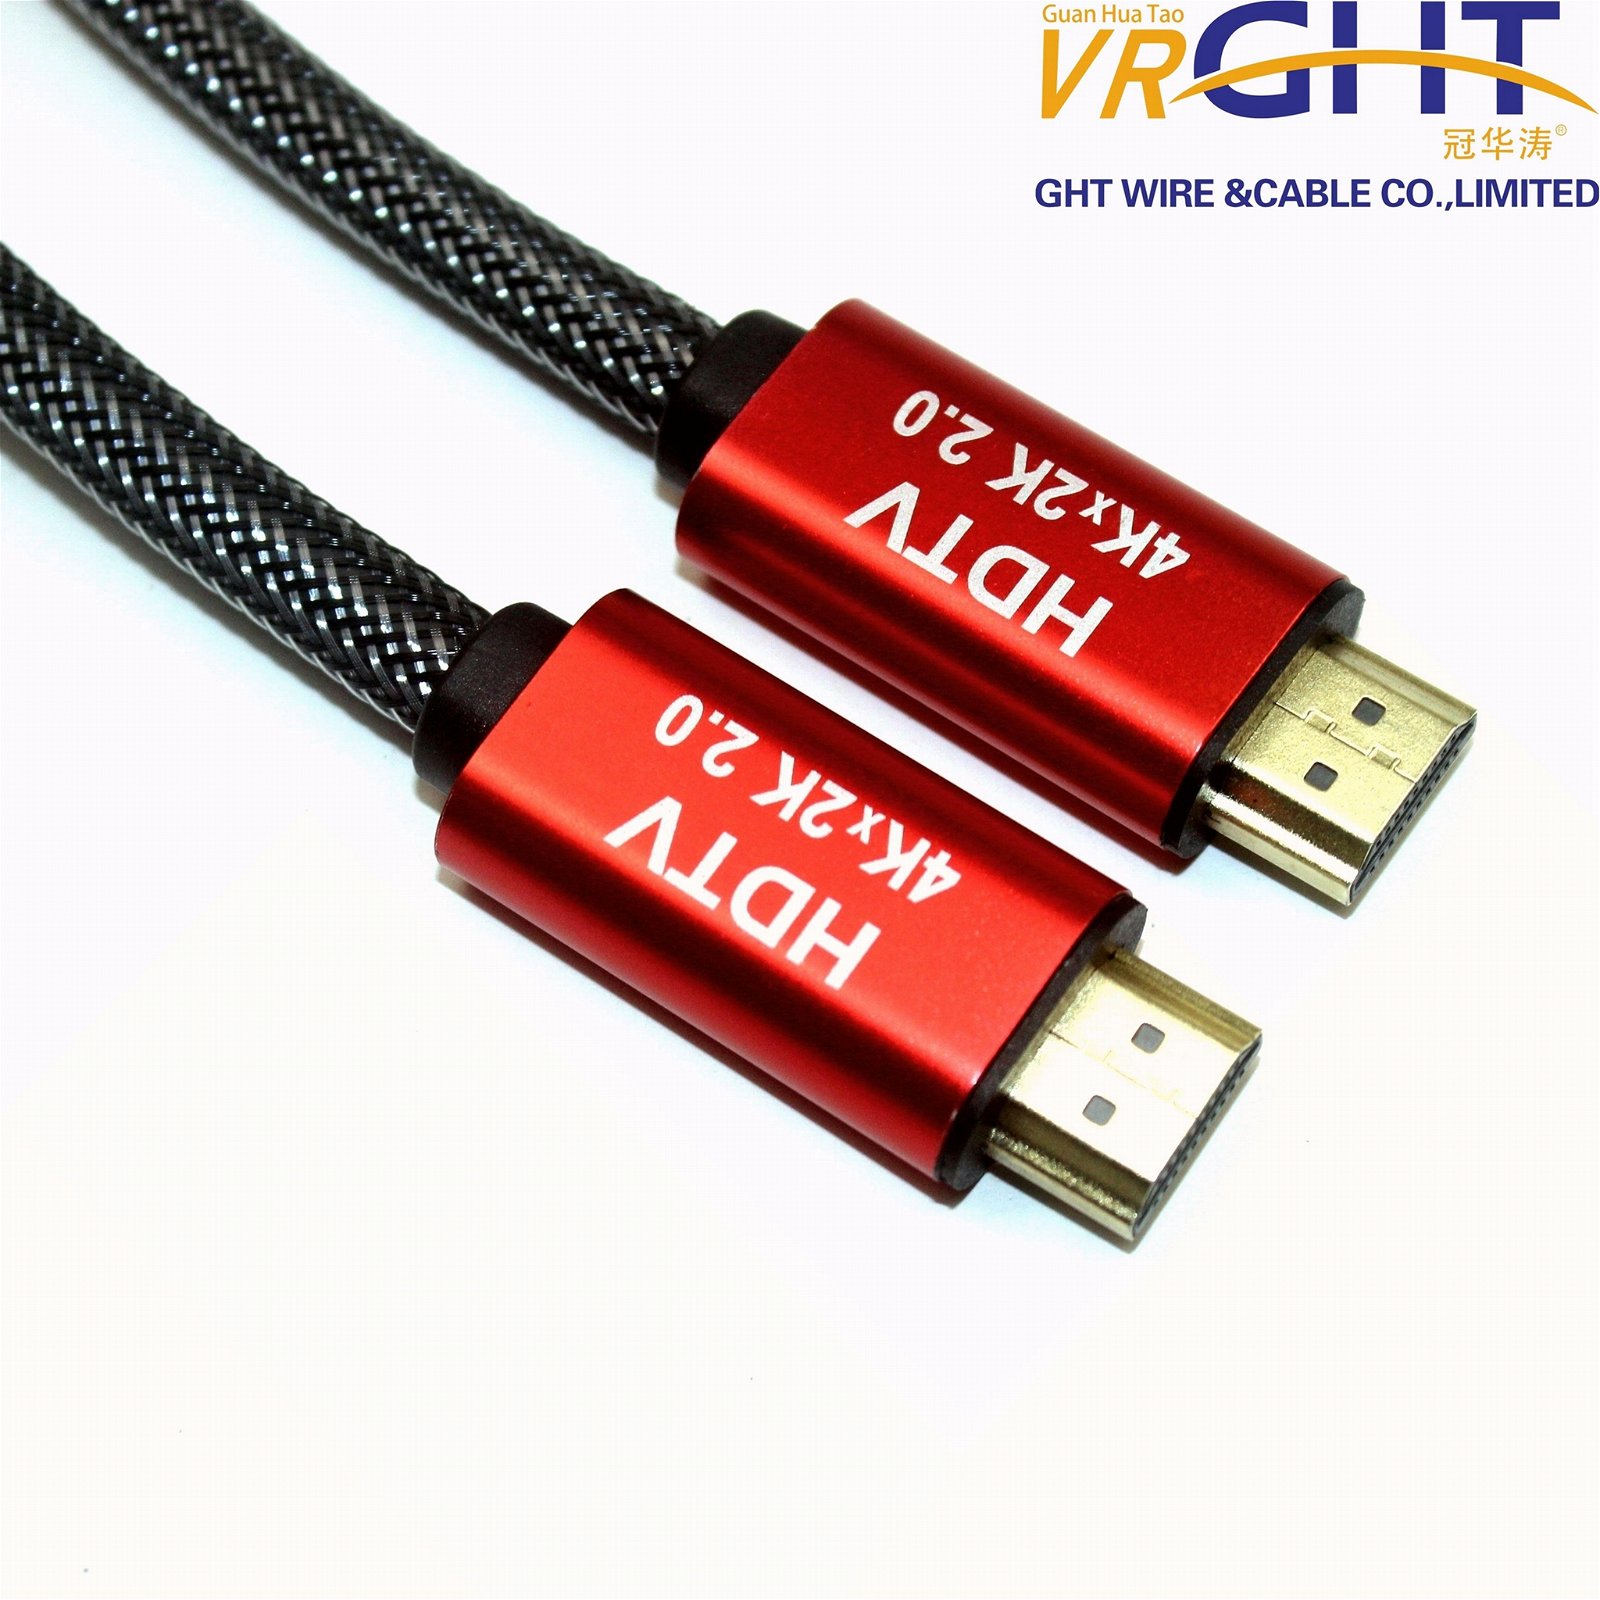  19+1 HDMI CABLE RED ALLOY 5